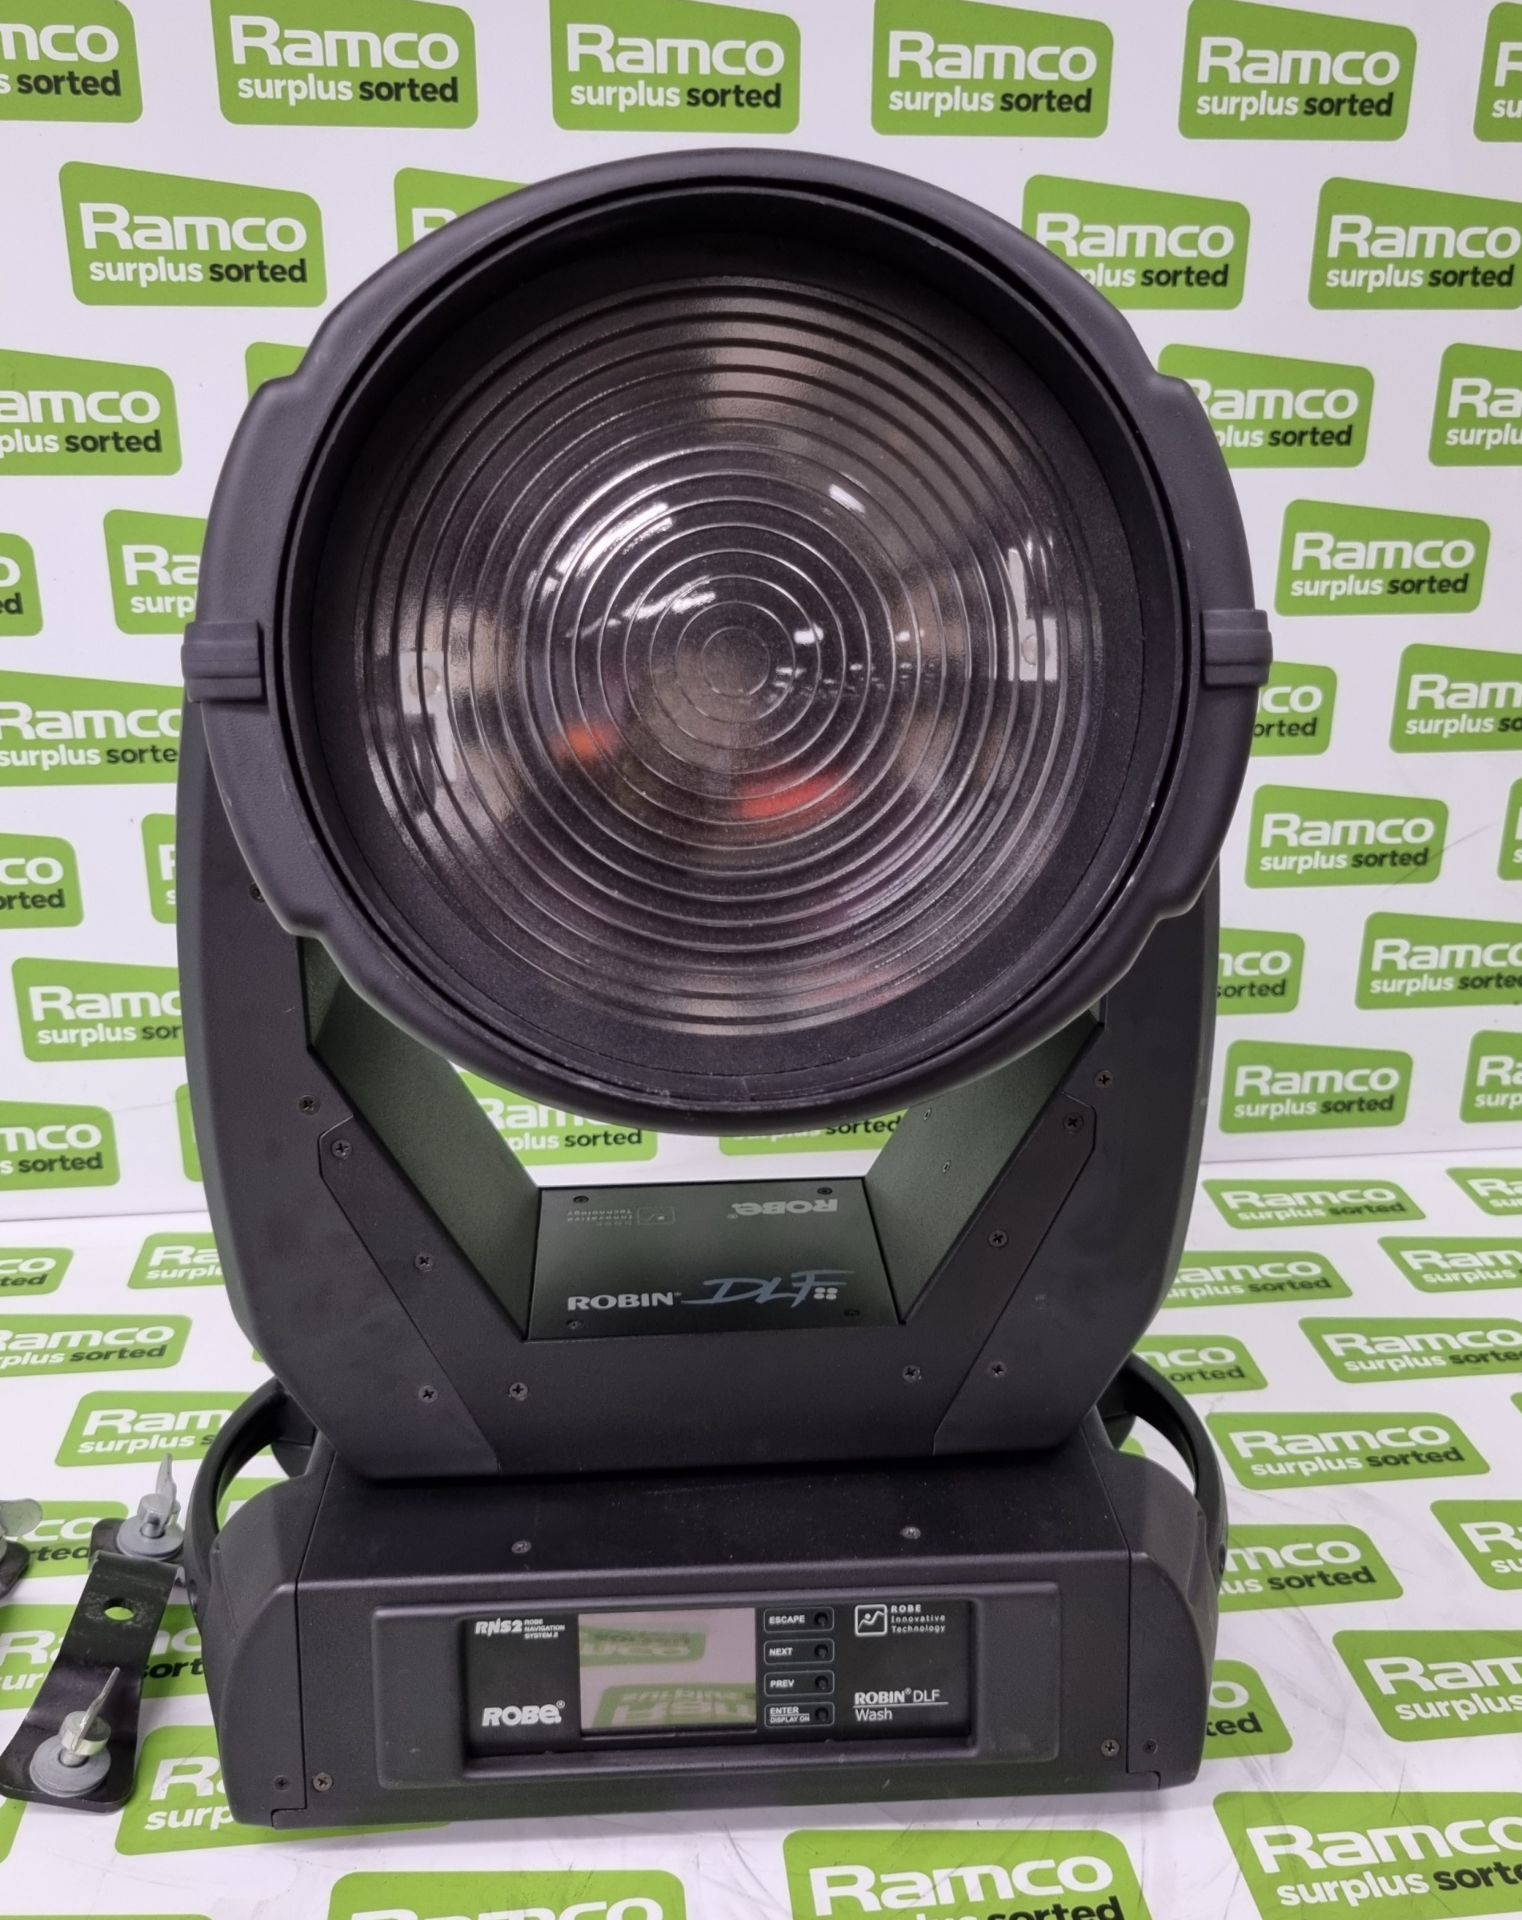 Robe Robin DLF Wash 550 watt RGBW moving head fresnel spot lamp SPARES OR REPAIRS - Image 3 of 9